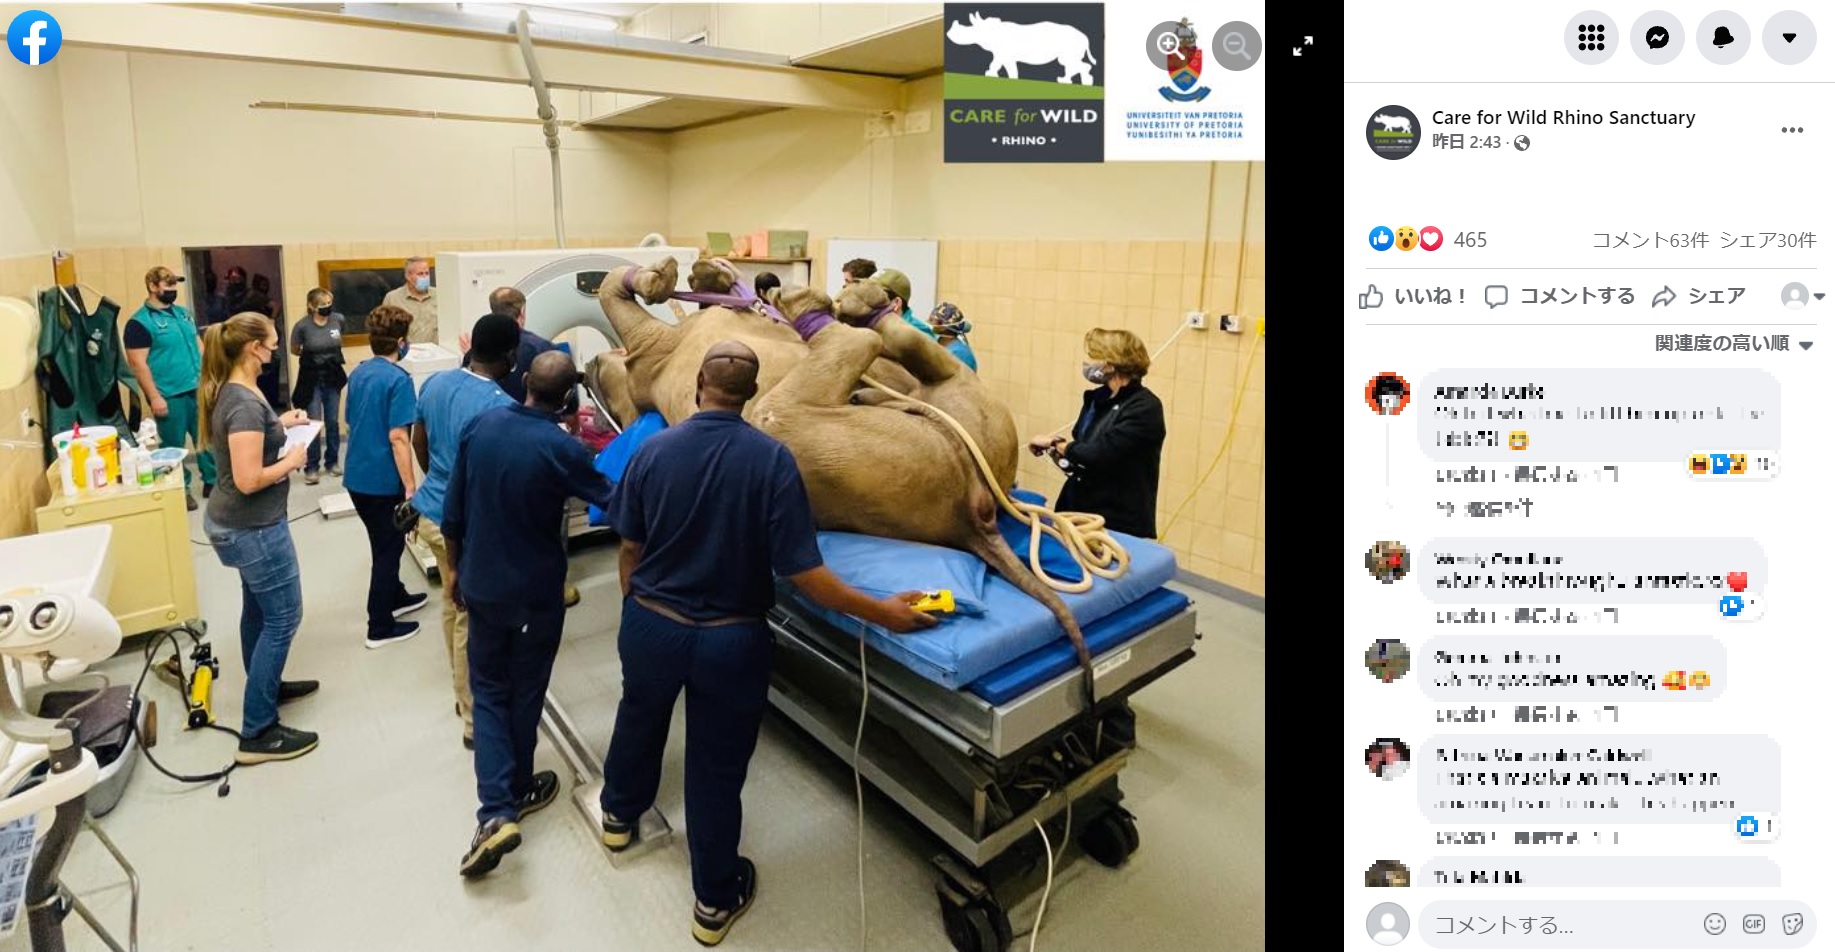 CTスキャンでの検査を受けるシロサイ（画像は『Care for Wild Rhino Sanctuary　2021年10月21日付Facebook「FIRST EVER CT SCAN ON A LIVE ADULT RHINO IN SOUTH AFRICA!」』のスクリーンショット）